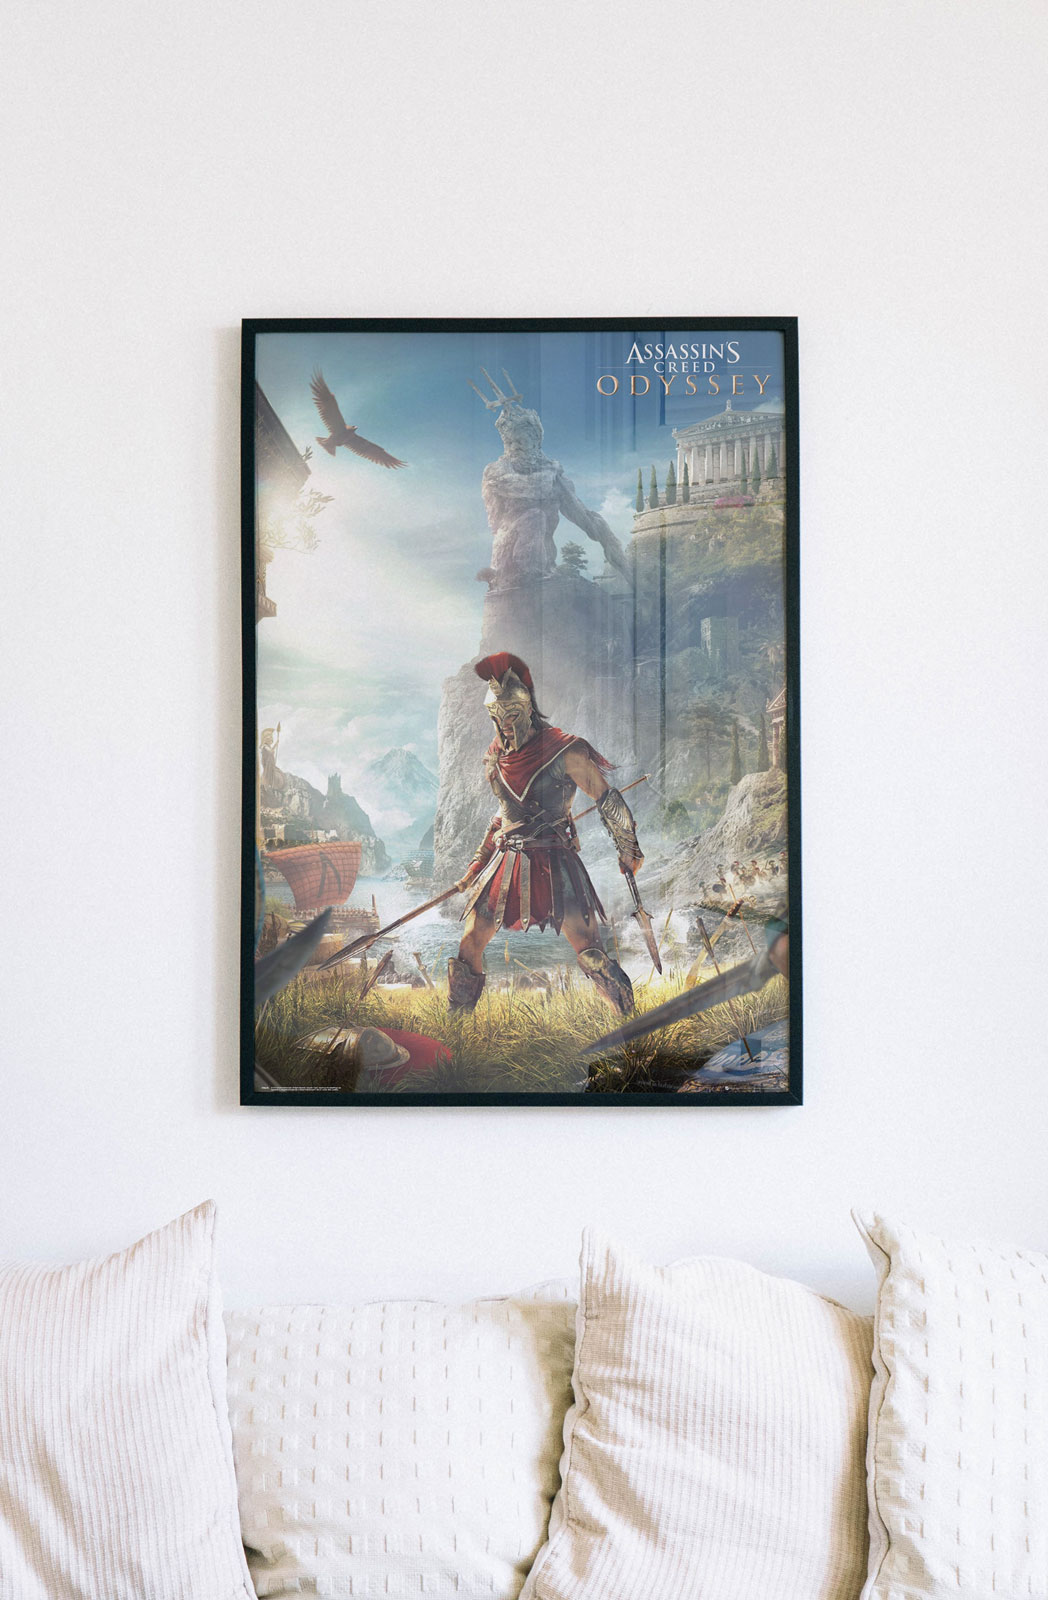 Poster Assassin's Creed Odyssey